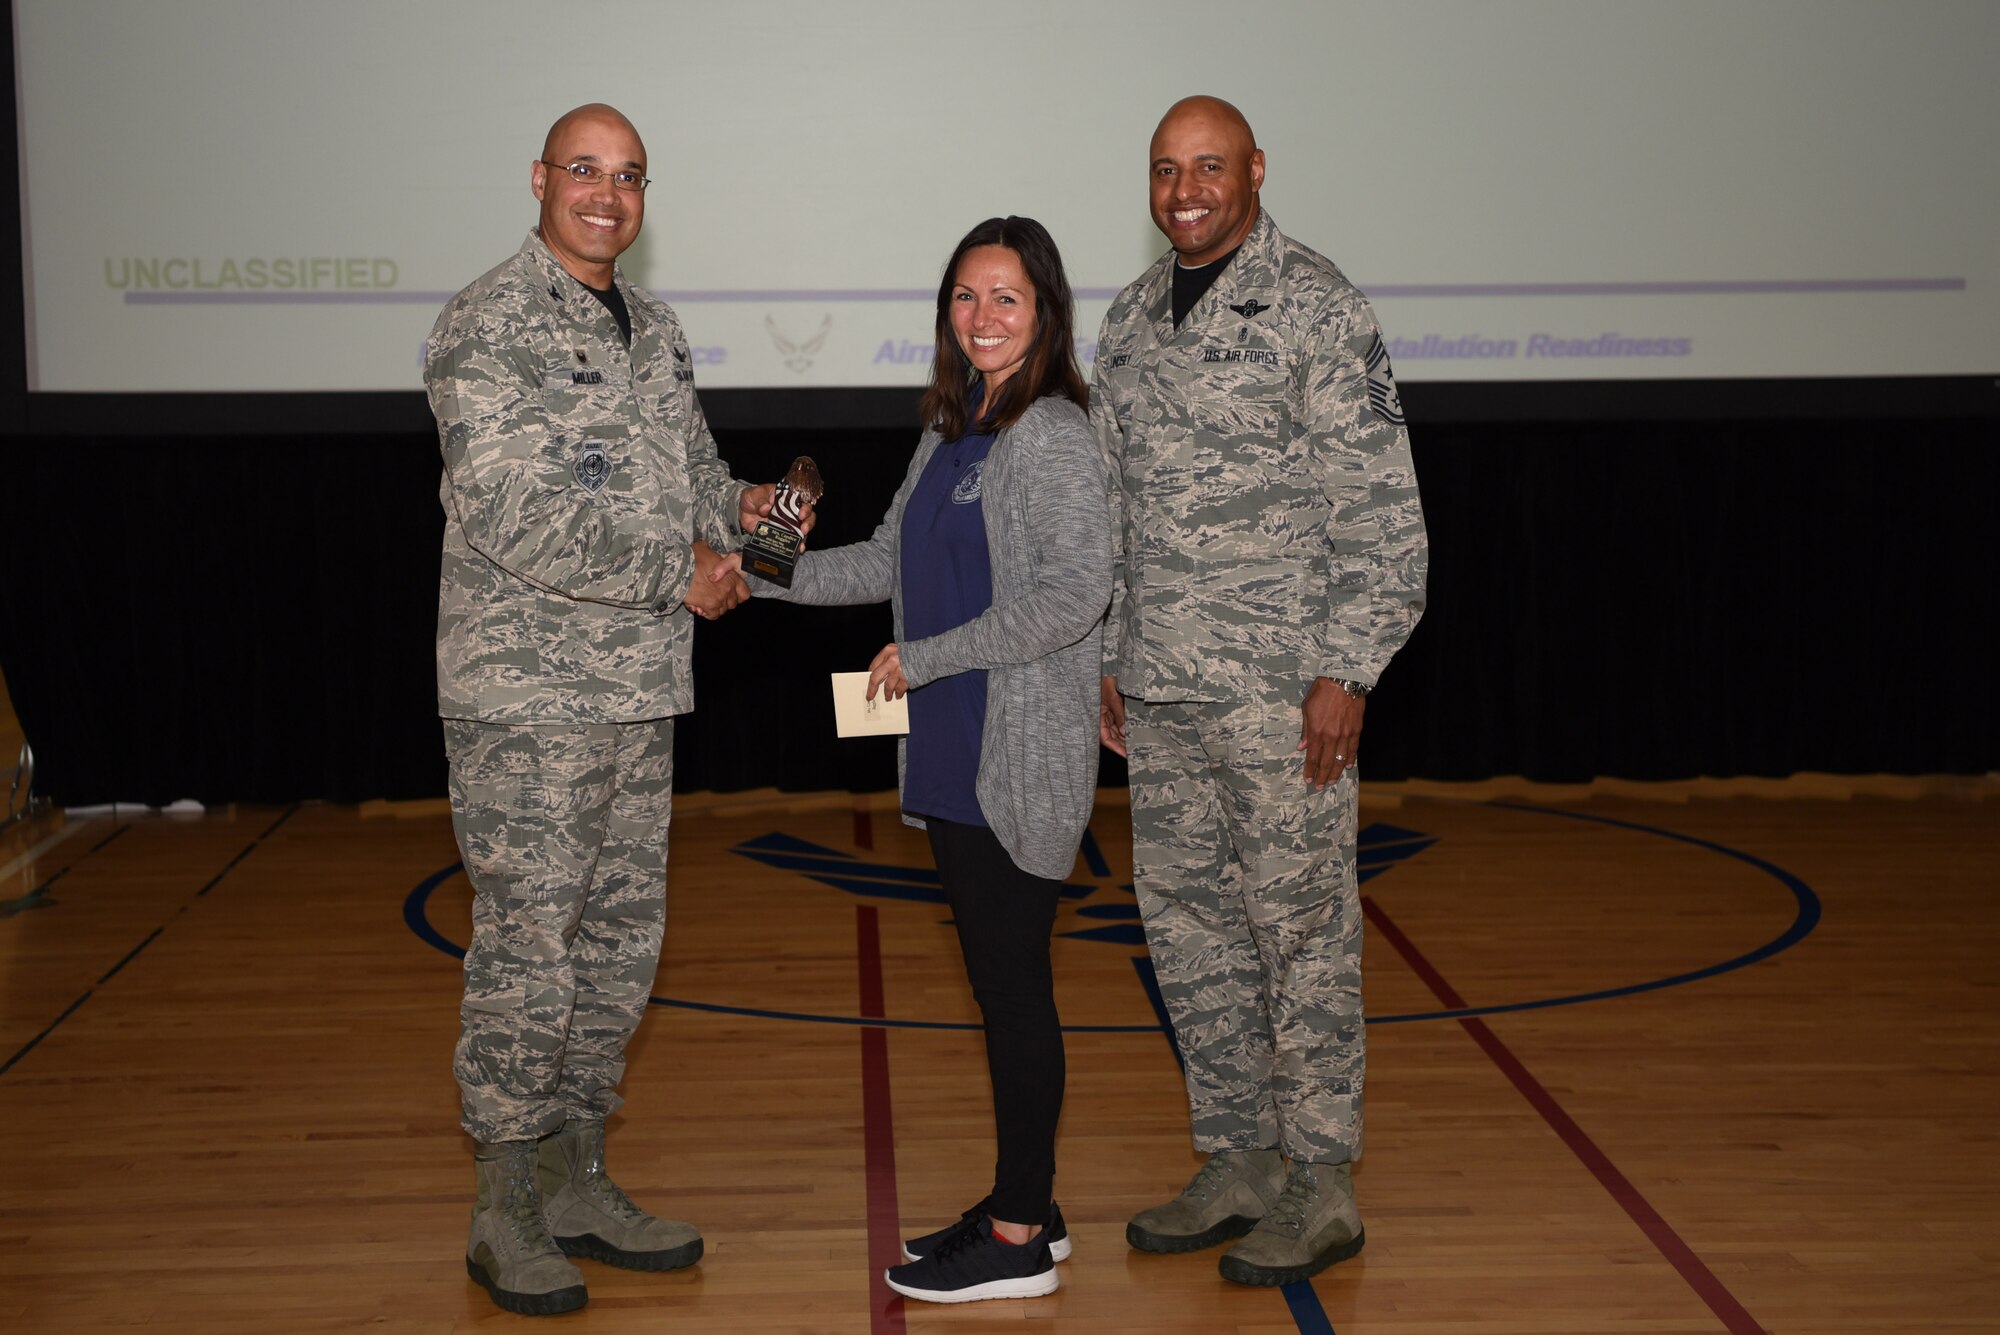 Candice Ruggles, 460th Force Support Squadron lead program technician, receives the Category I Supervisory Civilian of the Quarter Award May 19, 2017, on Buckley Air Force Base, Colo.  Awards were given to the Team Buckley members who showed dedication, hard work and exceeded their supervisor’s expectations. (U.S. Air Force photo by Airman 1st Class Holden S. Faul/ Released)